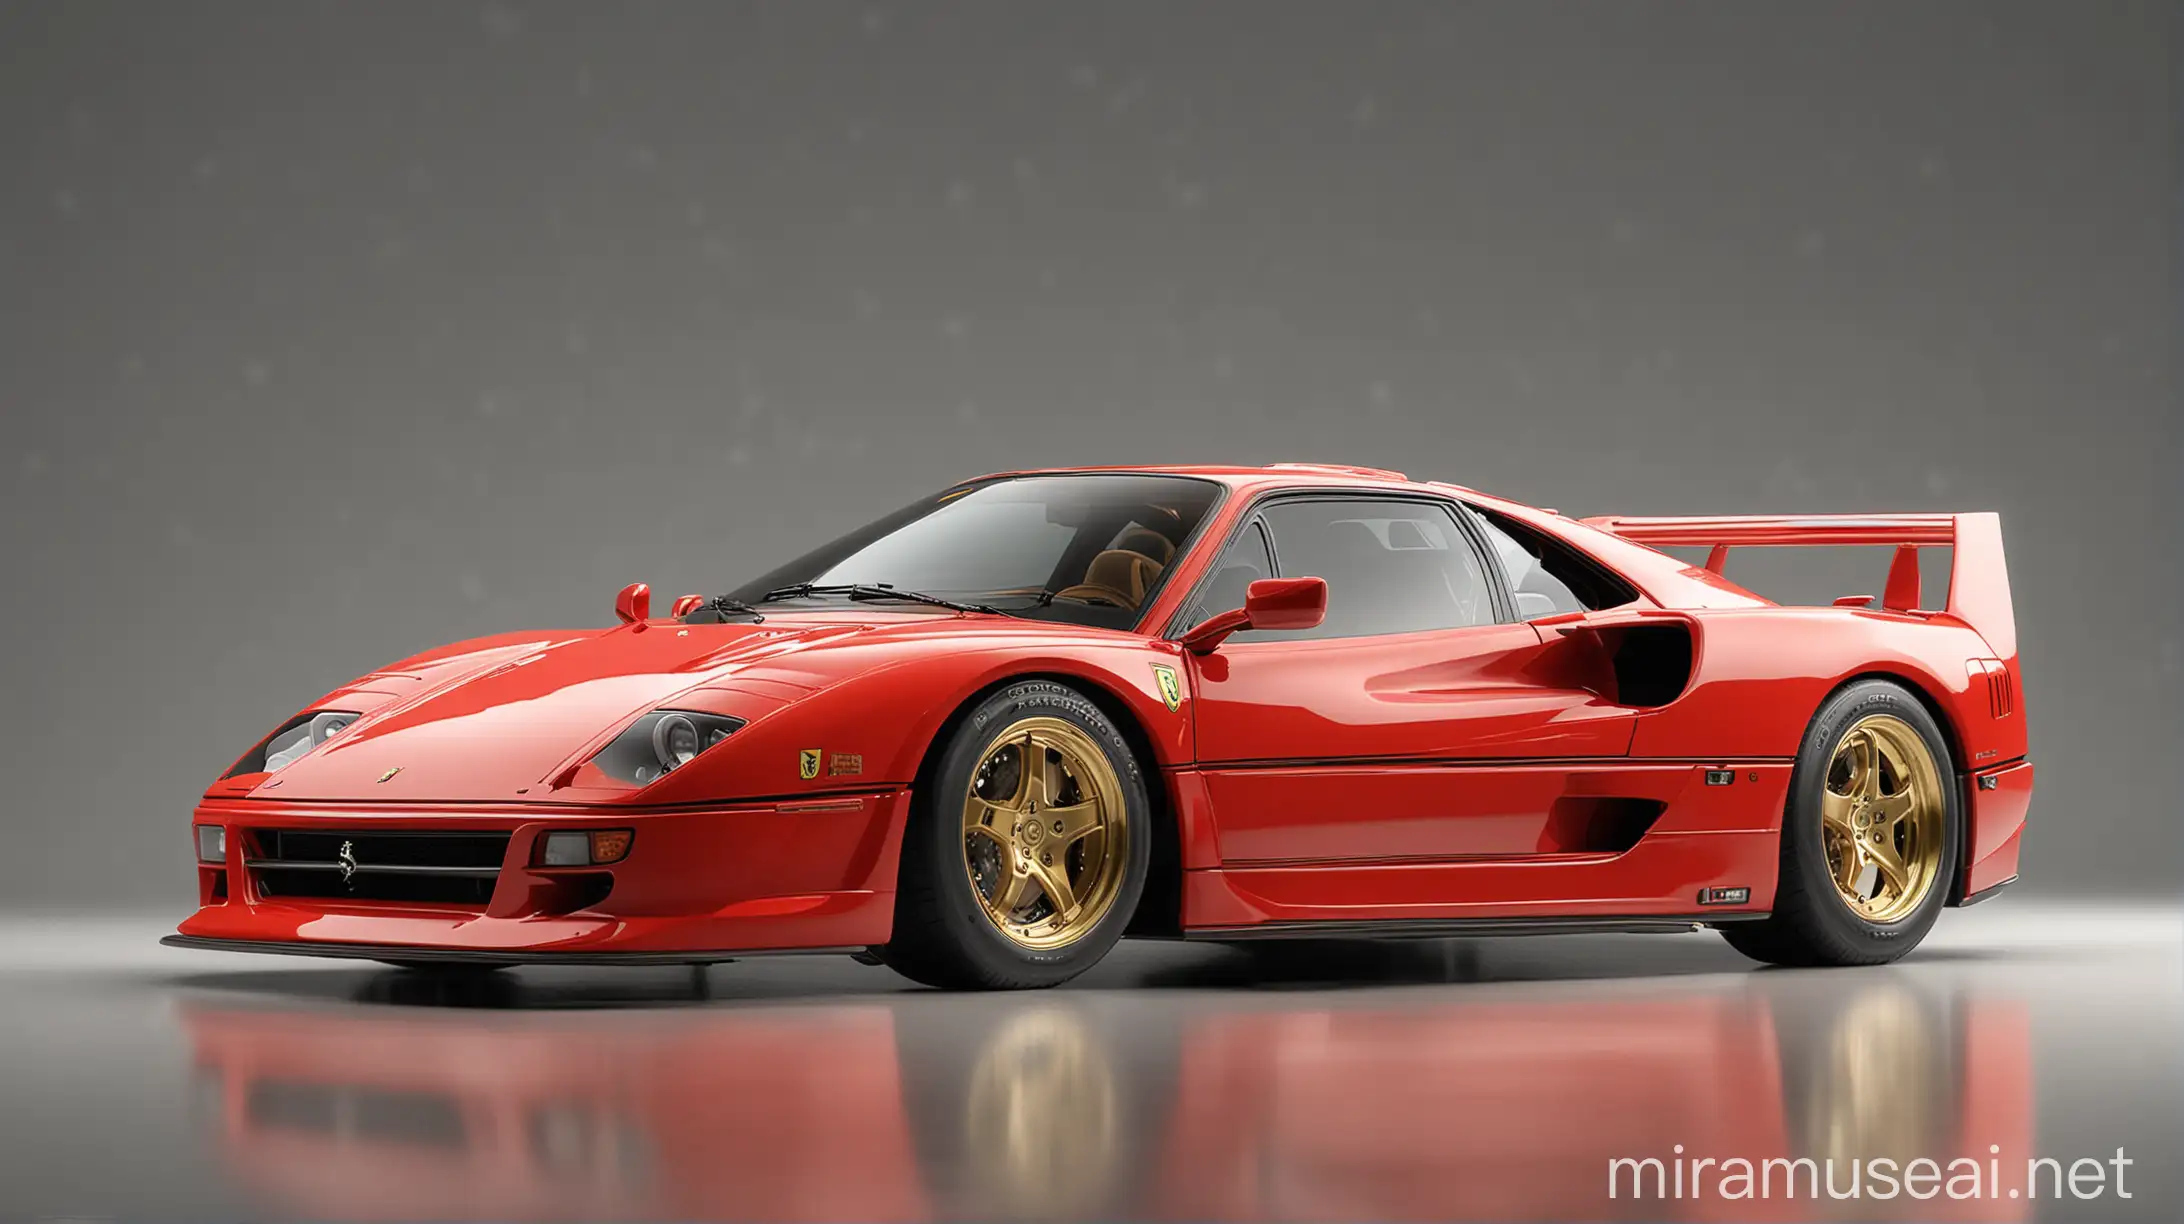 Luxurious Ferrari F40 3D Rendering in Super Reflective Red and Lime Green